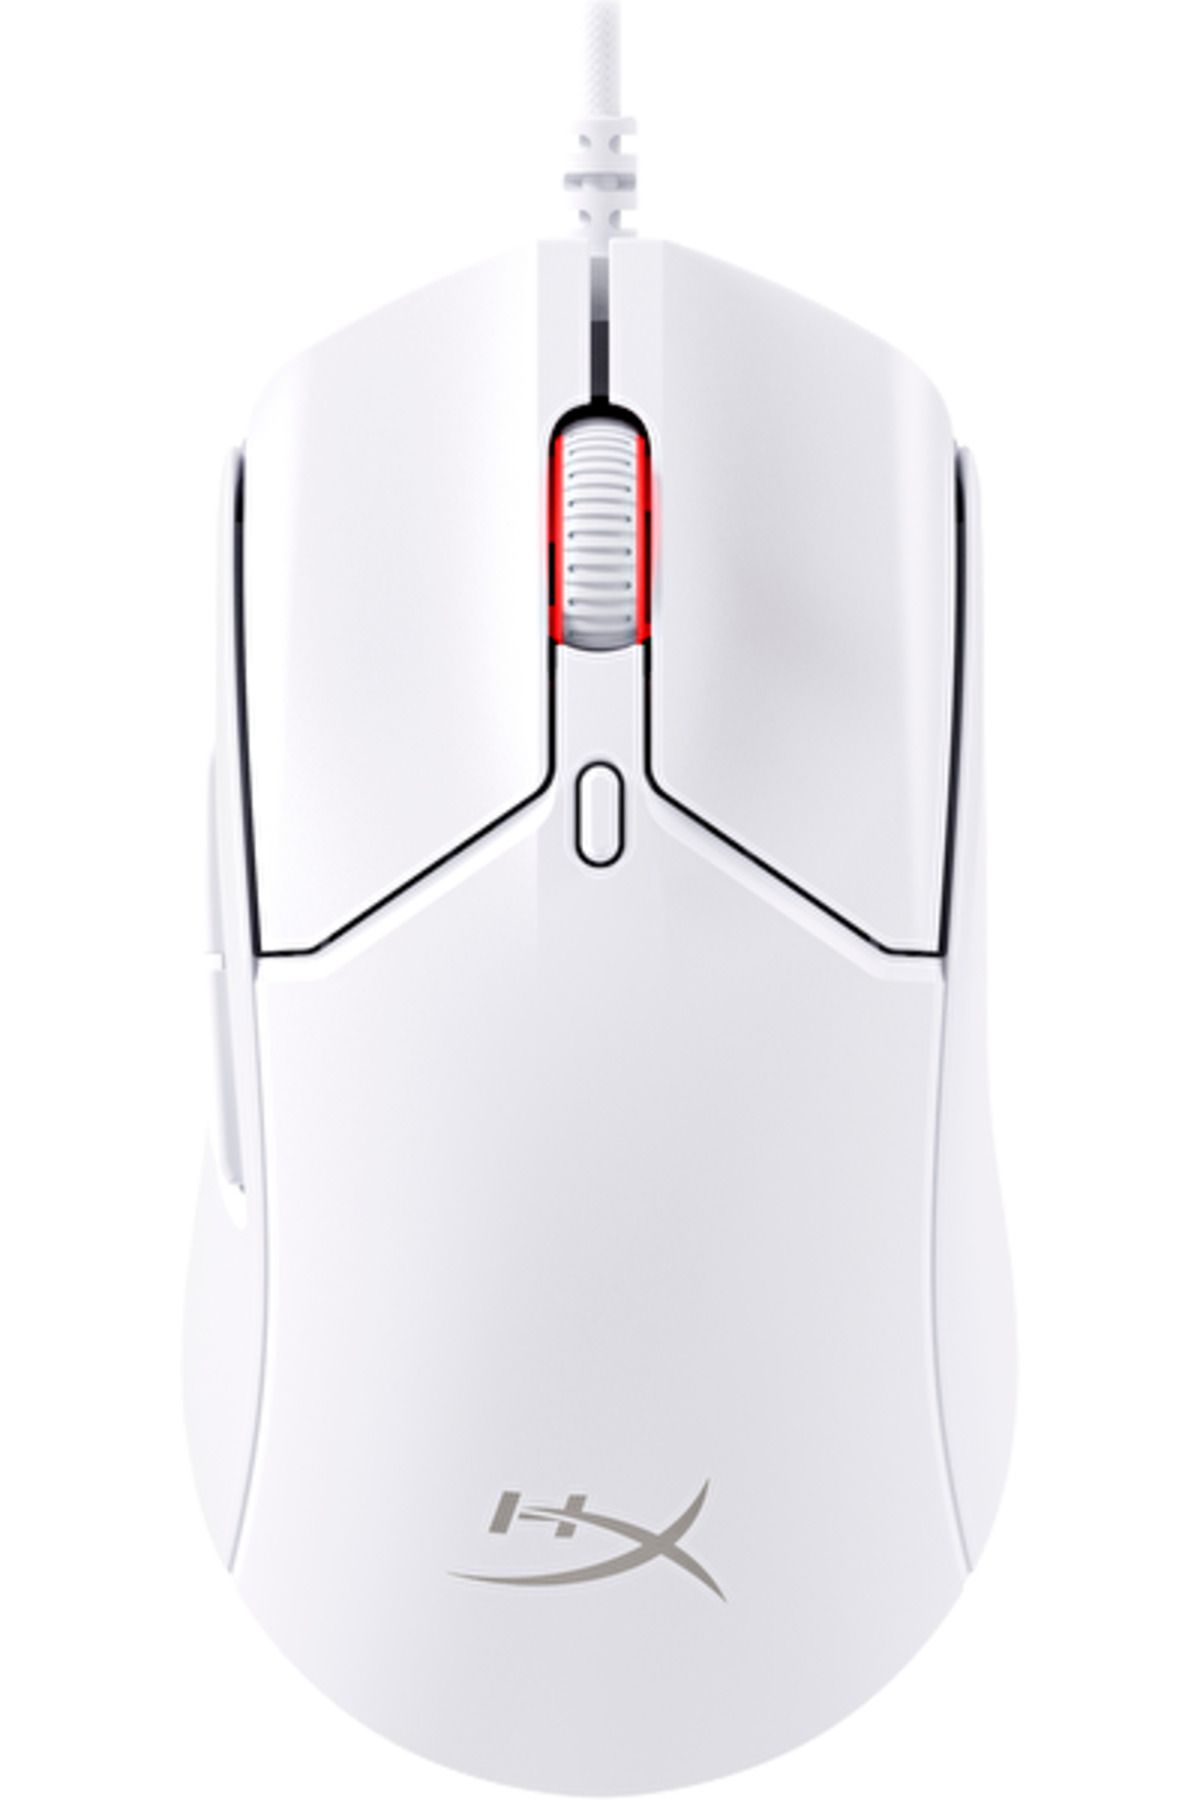 HyperX 6n0a8aa Pulsefire Haste 2 White Wired Gaming Mouse